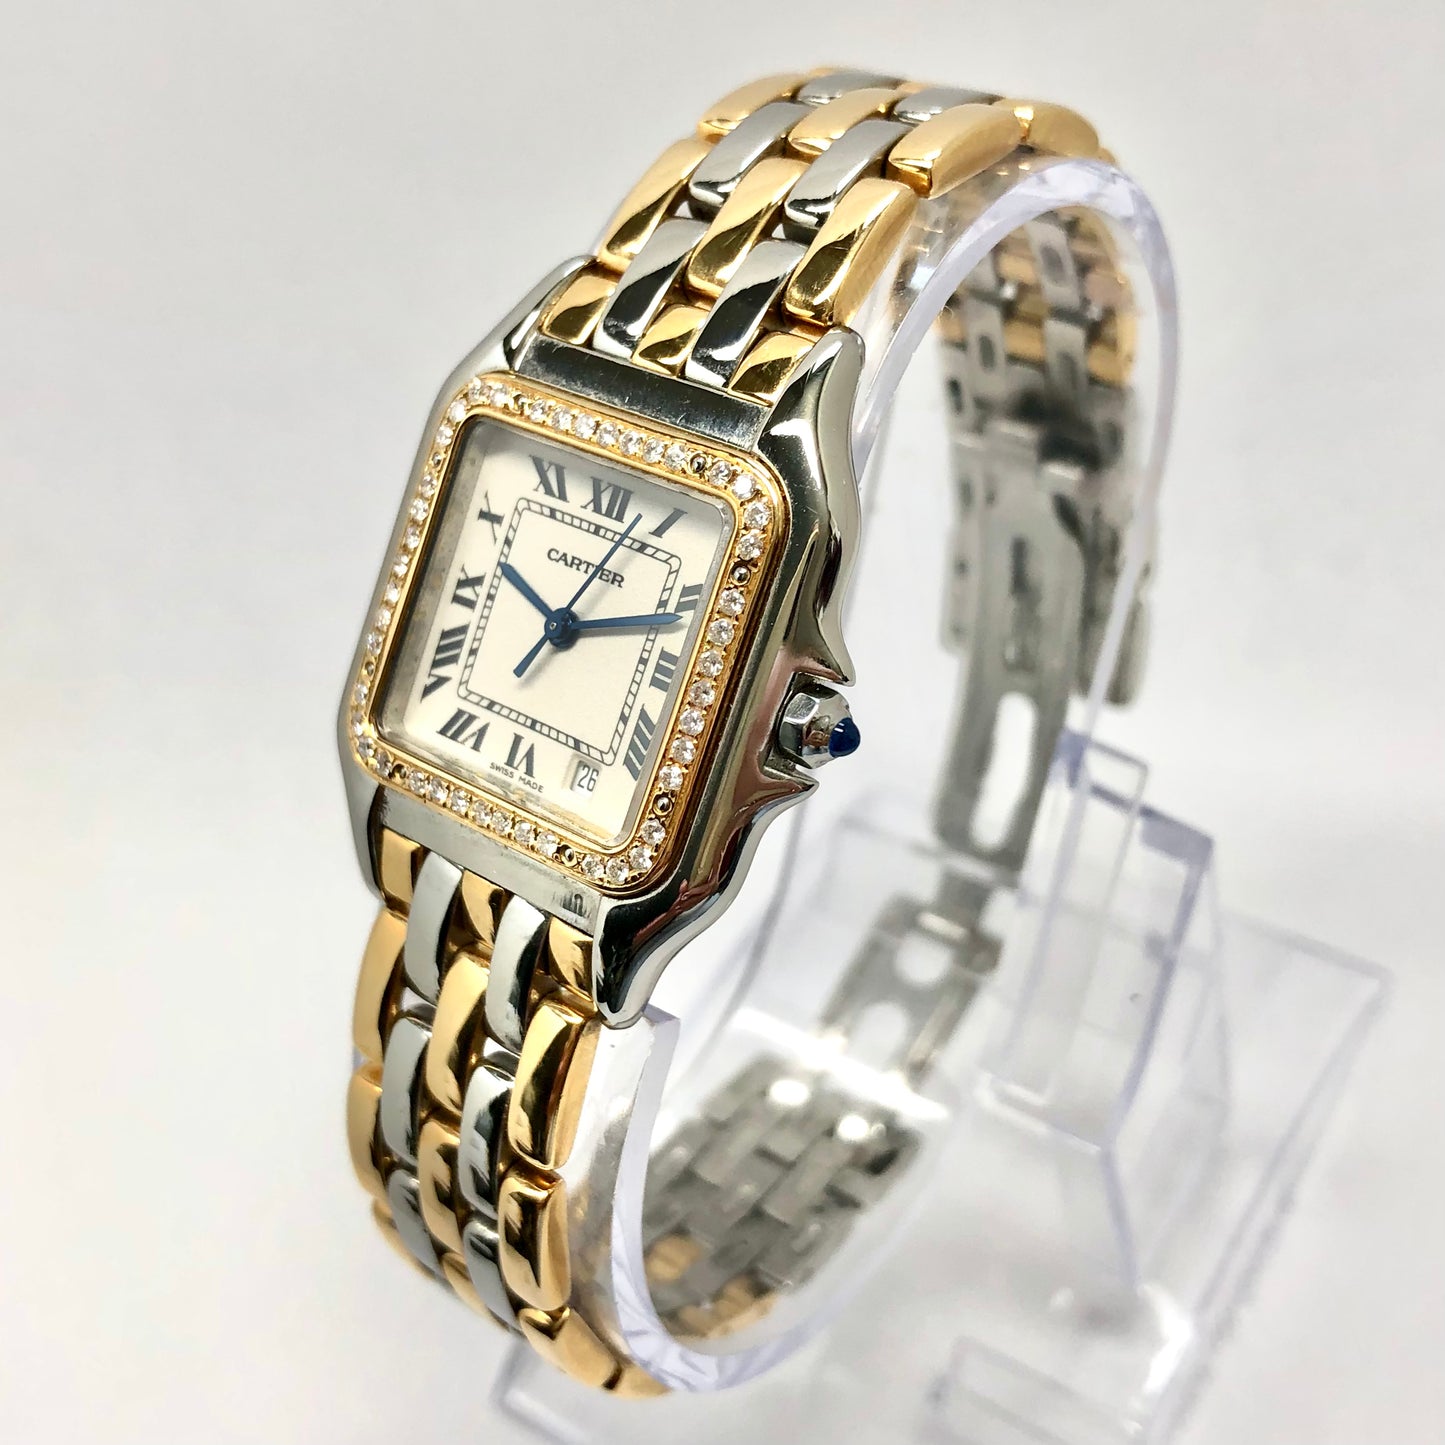 CARTIER PANTHERE 27mm 3 Row Gold 0.5TCW DIAMOND Watch